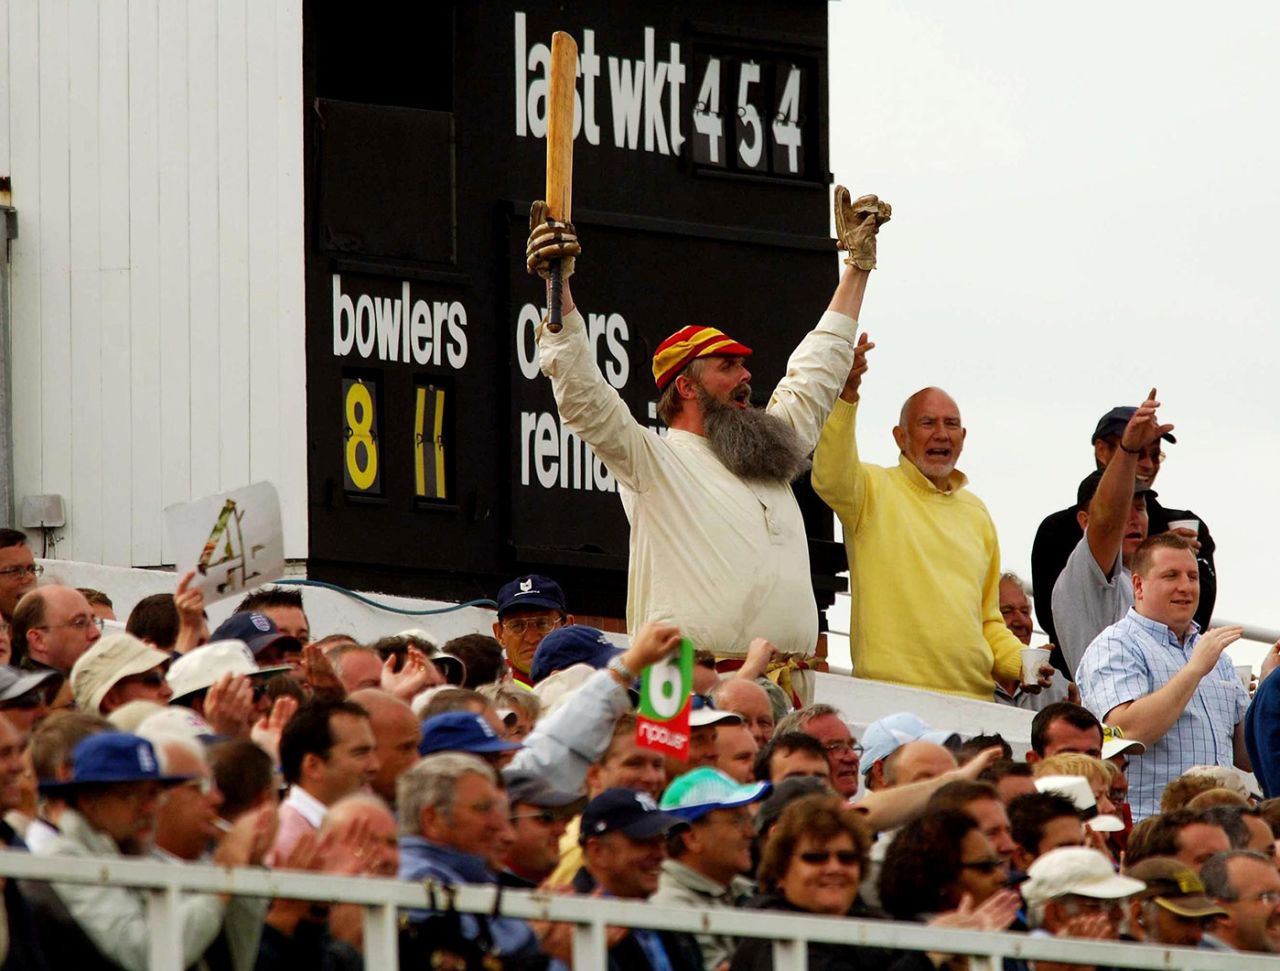 A WG Grace lookalike in the crowd, England v Australia, fourth Test, second day, Nottingham, August 26, 2005